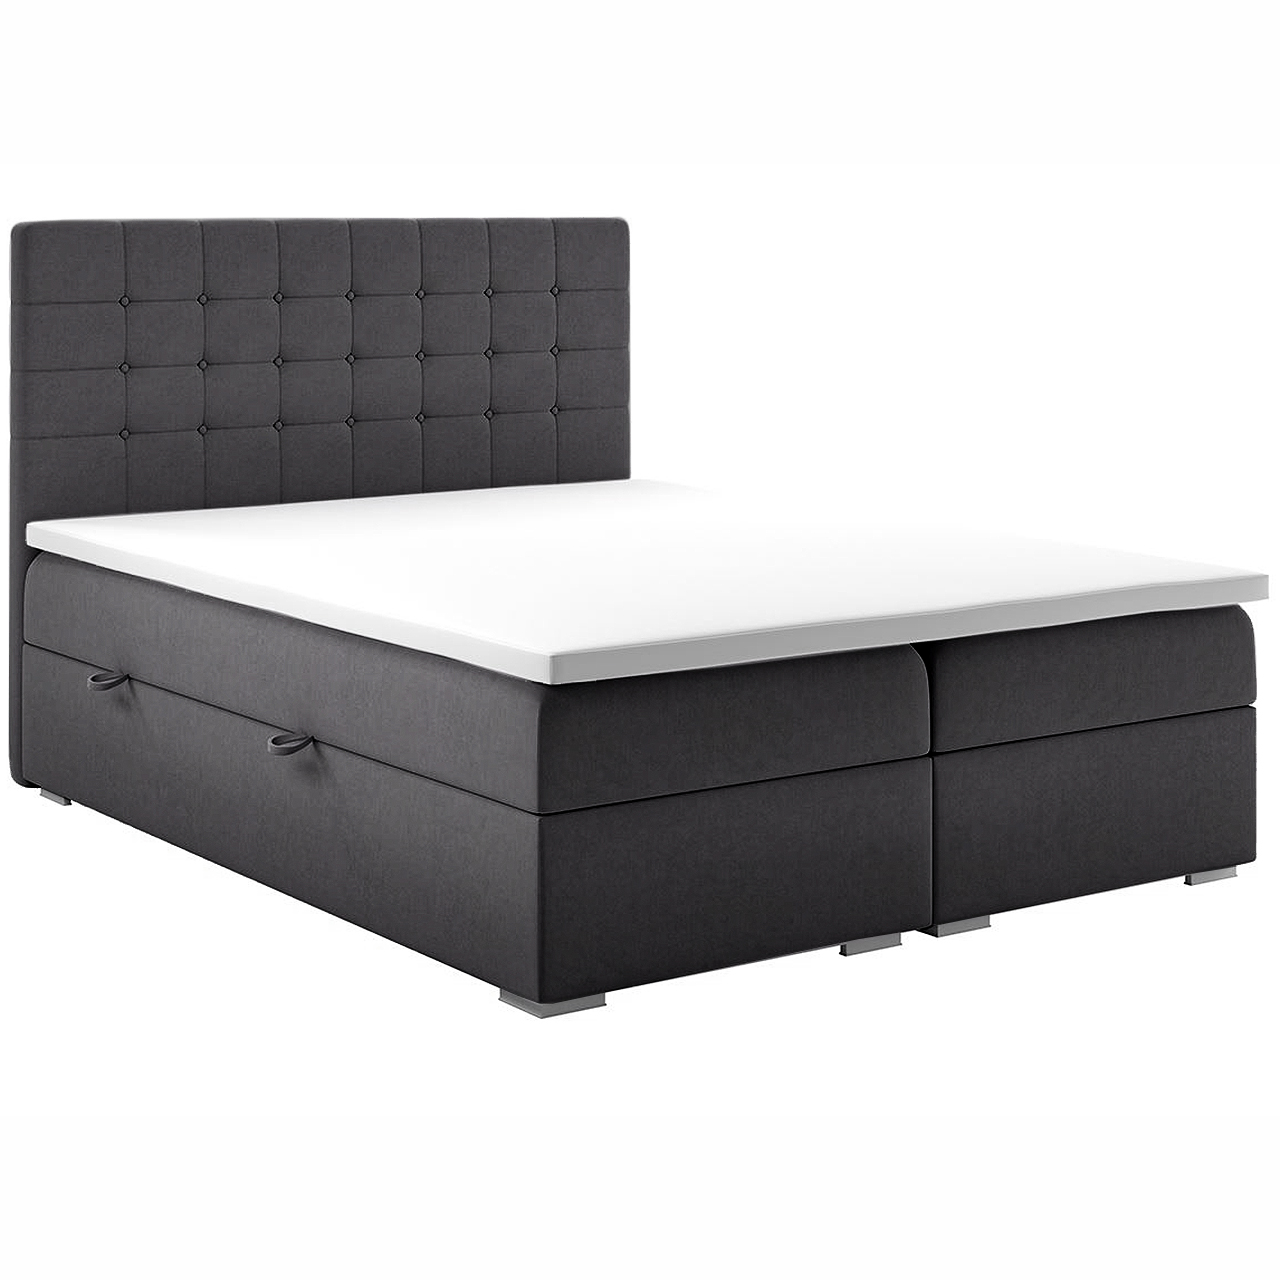 Upholstered bed CLAUDIS 120x200 monolith 92